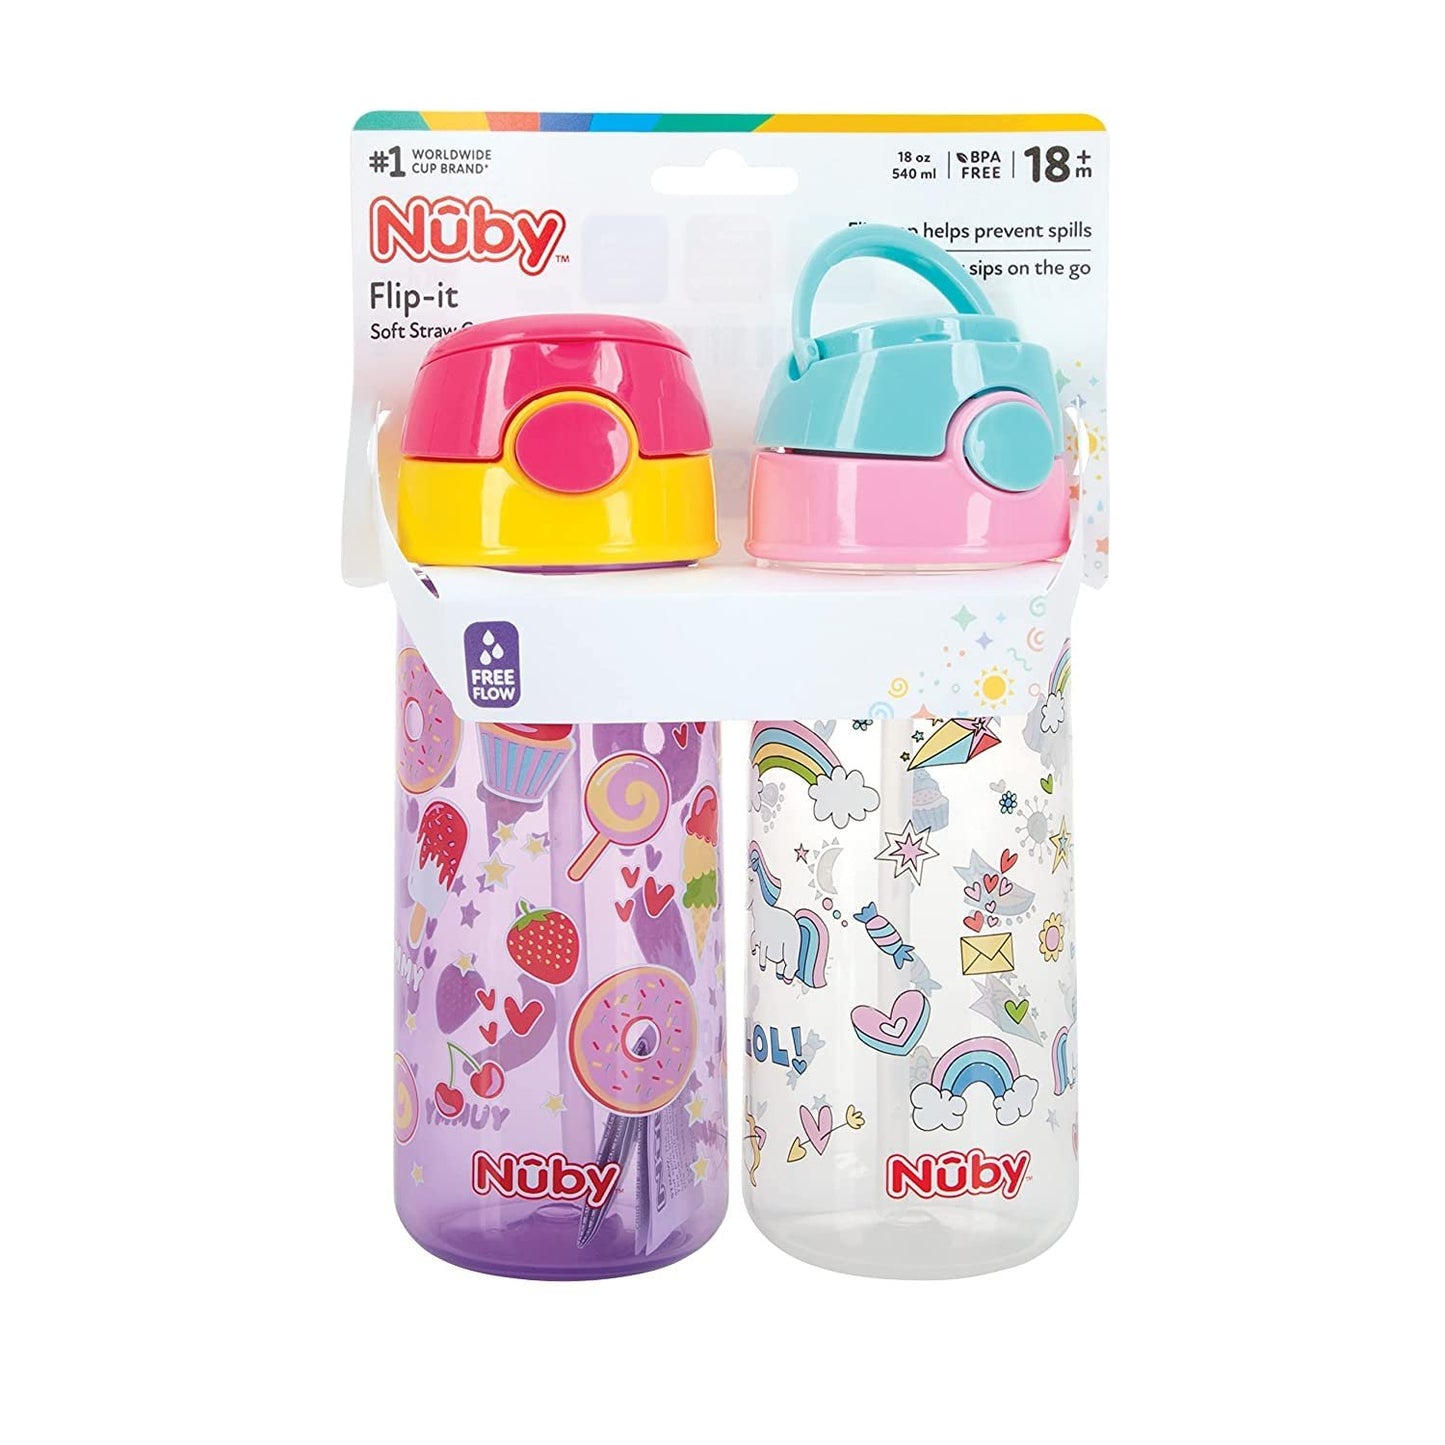 2-Pack Nuby Kid’s Printed Flip-it Active Water Bottle with Push Button Cap and Soft Straw - 18oz / 540ml, 18+ Months, 2-Pack